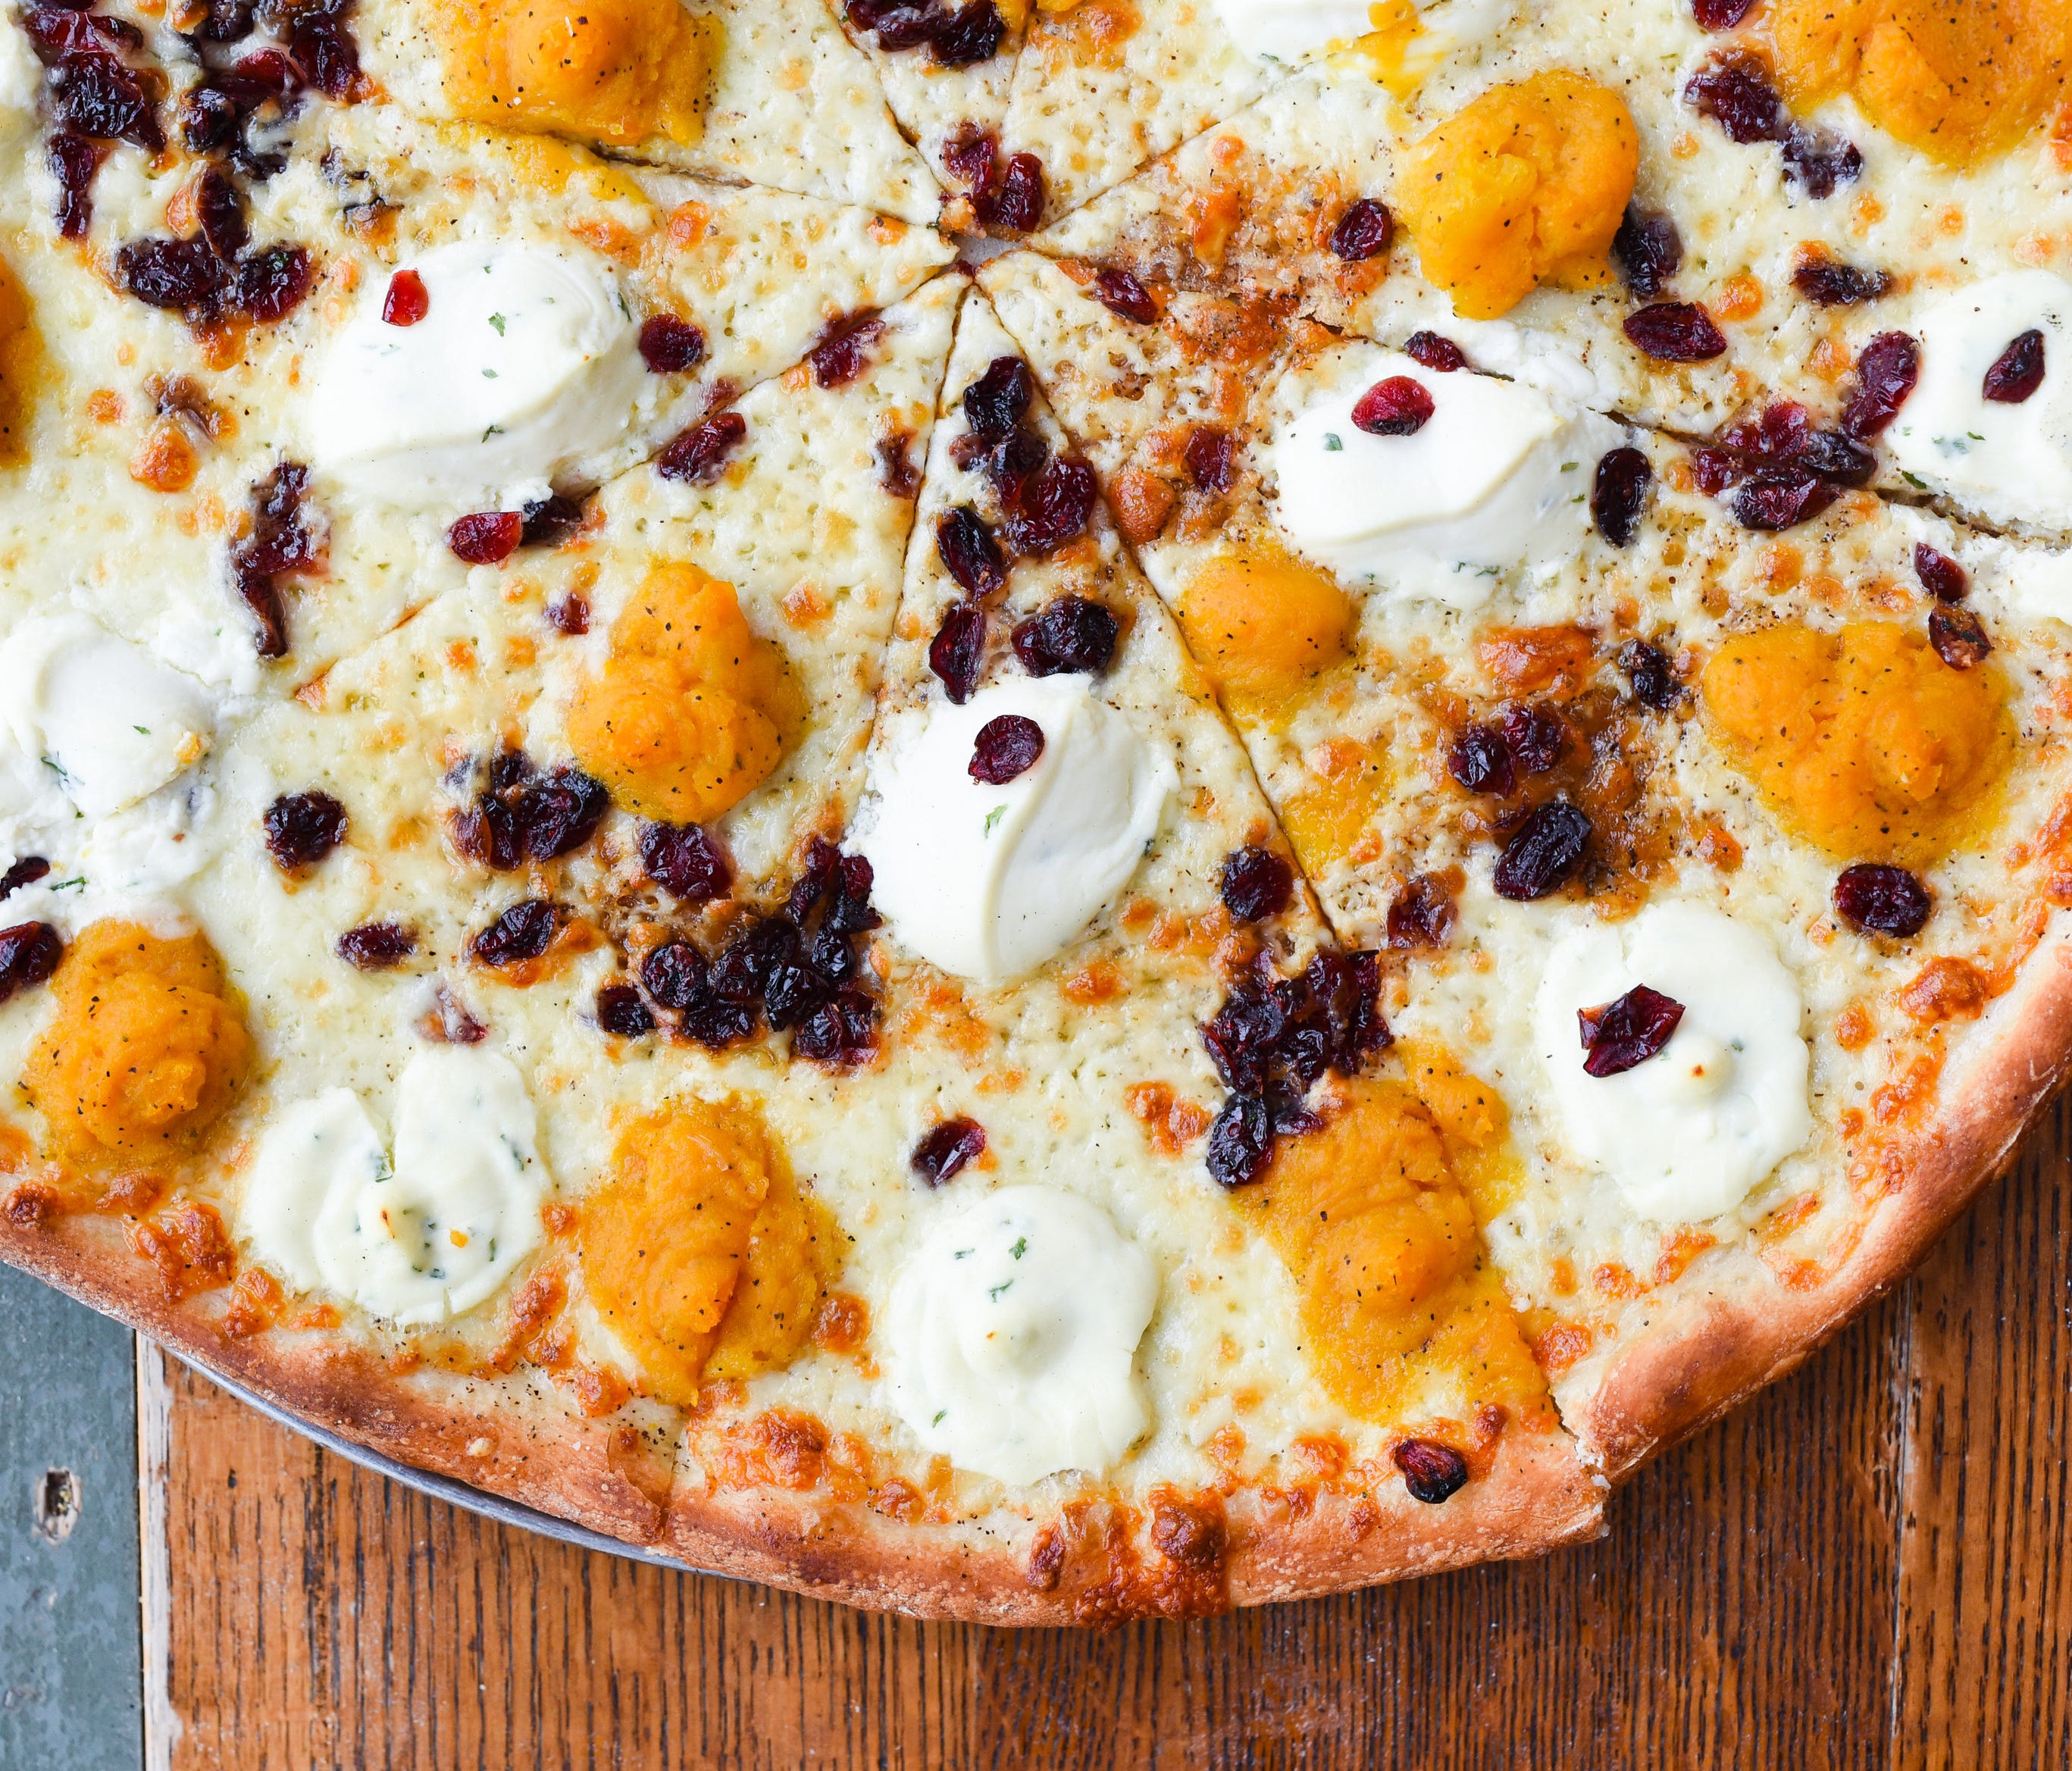 Otto is known for its gourmet thin-crust pizza and creative toppings.